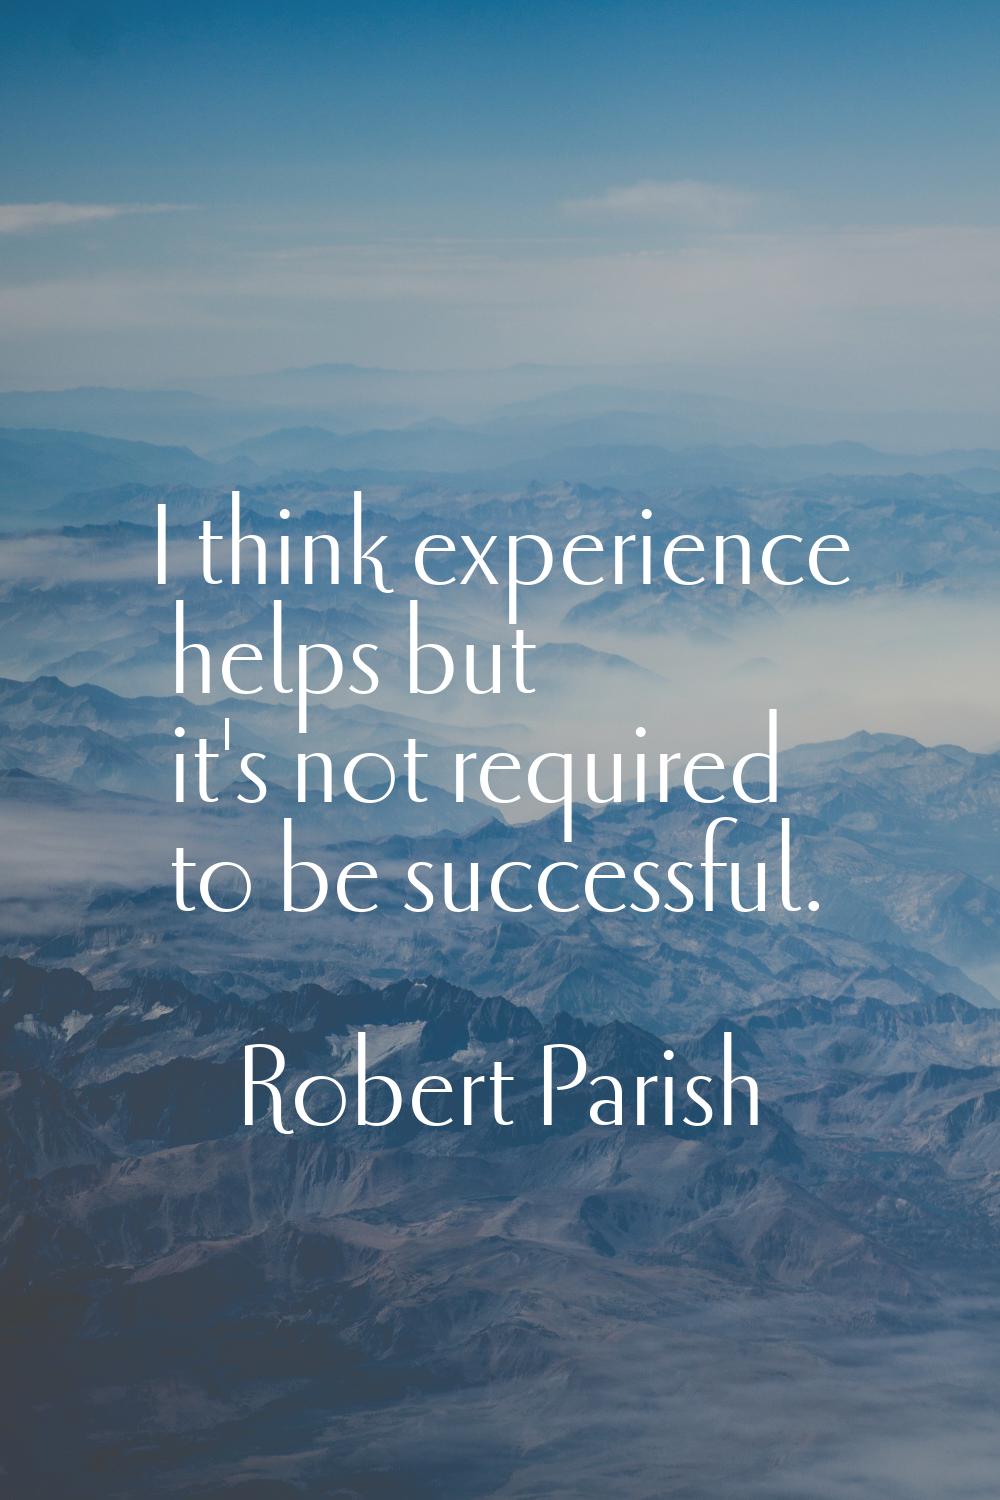 I think experience helps but it's not required to be successful.